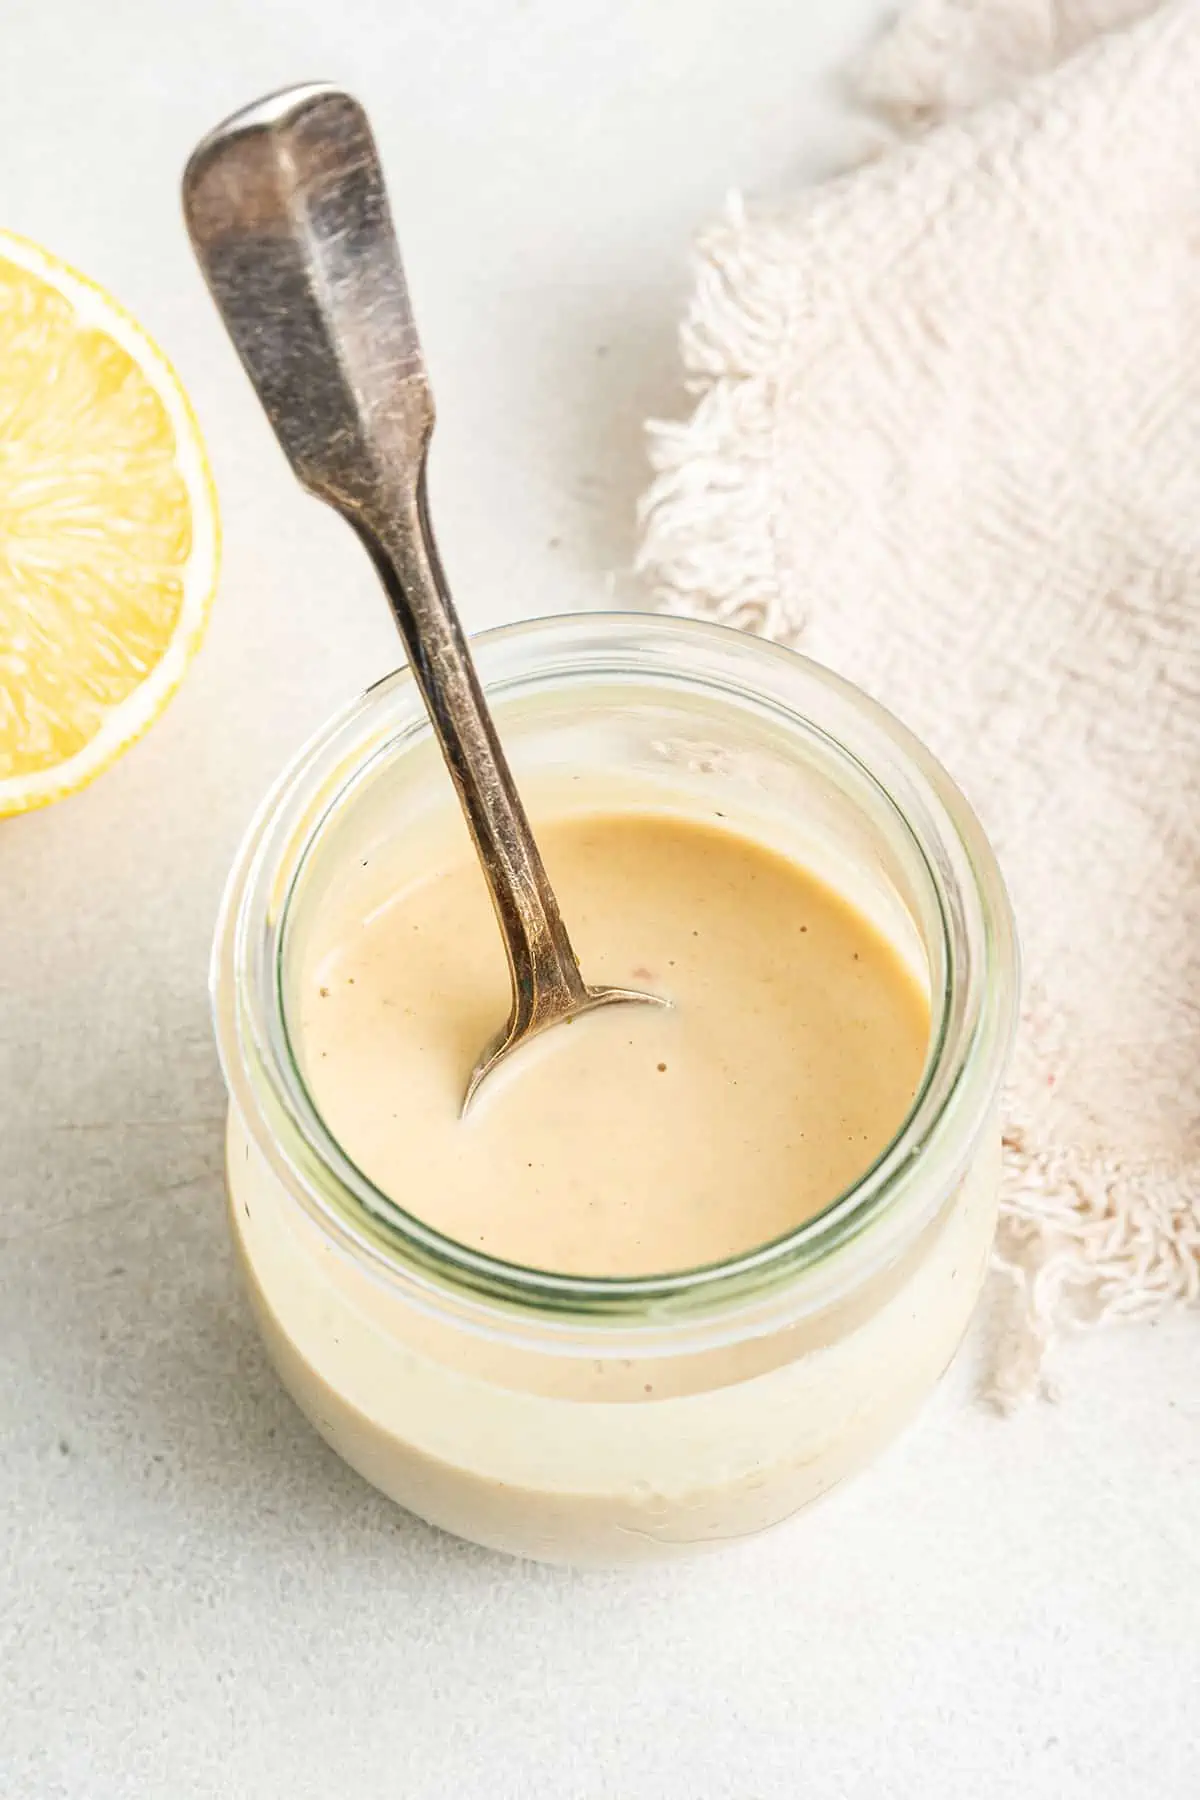 A jar of tahini dressing with a spoon in it, next to a lemon half